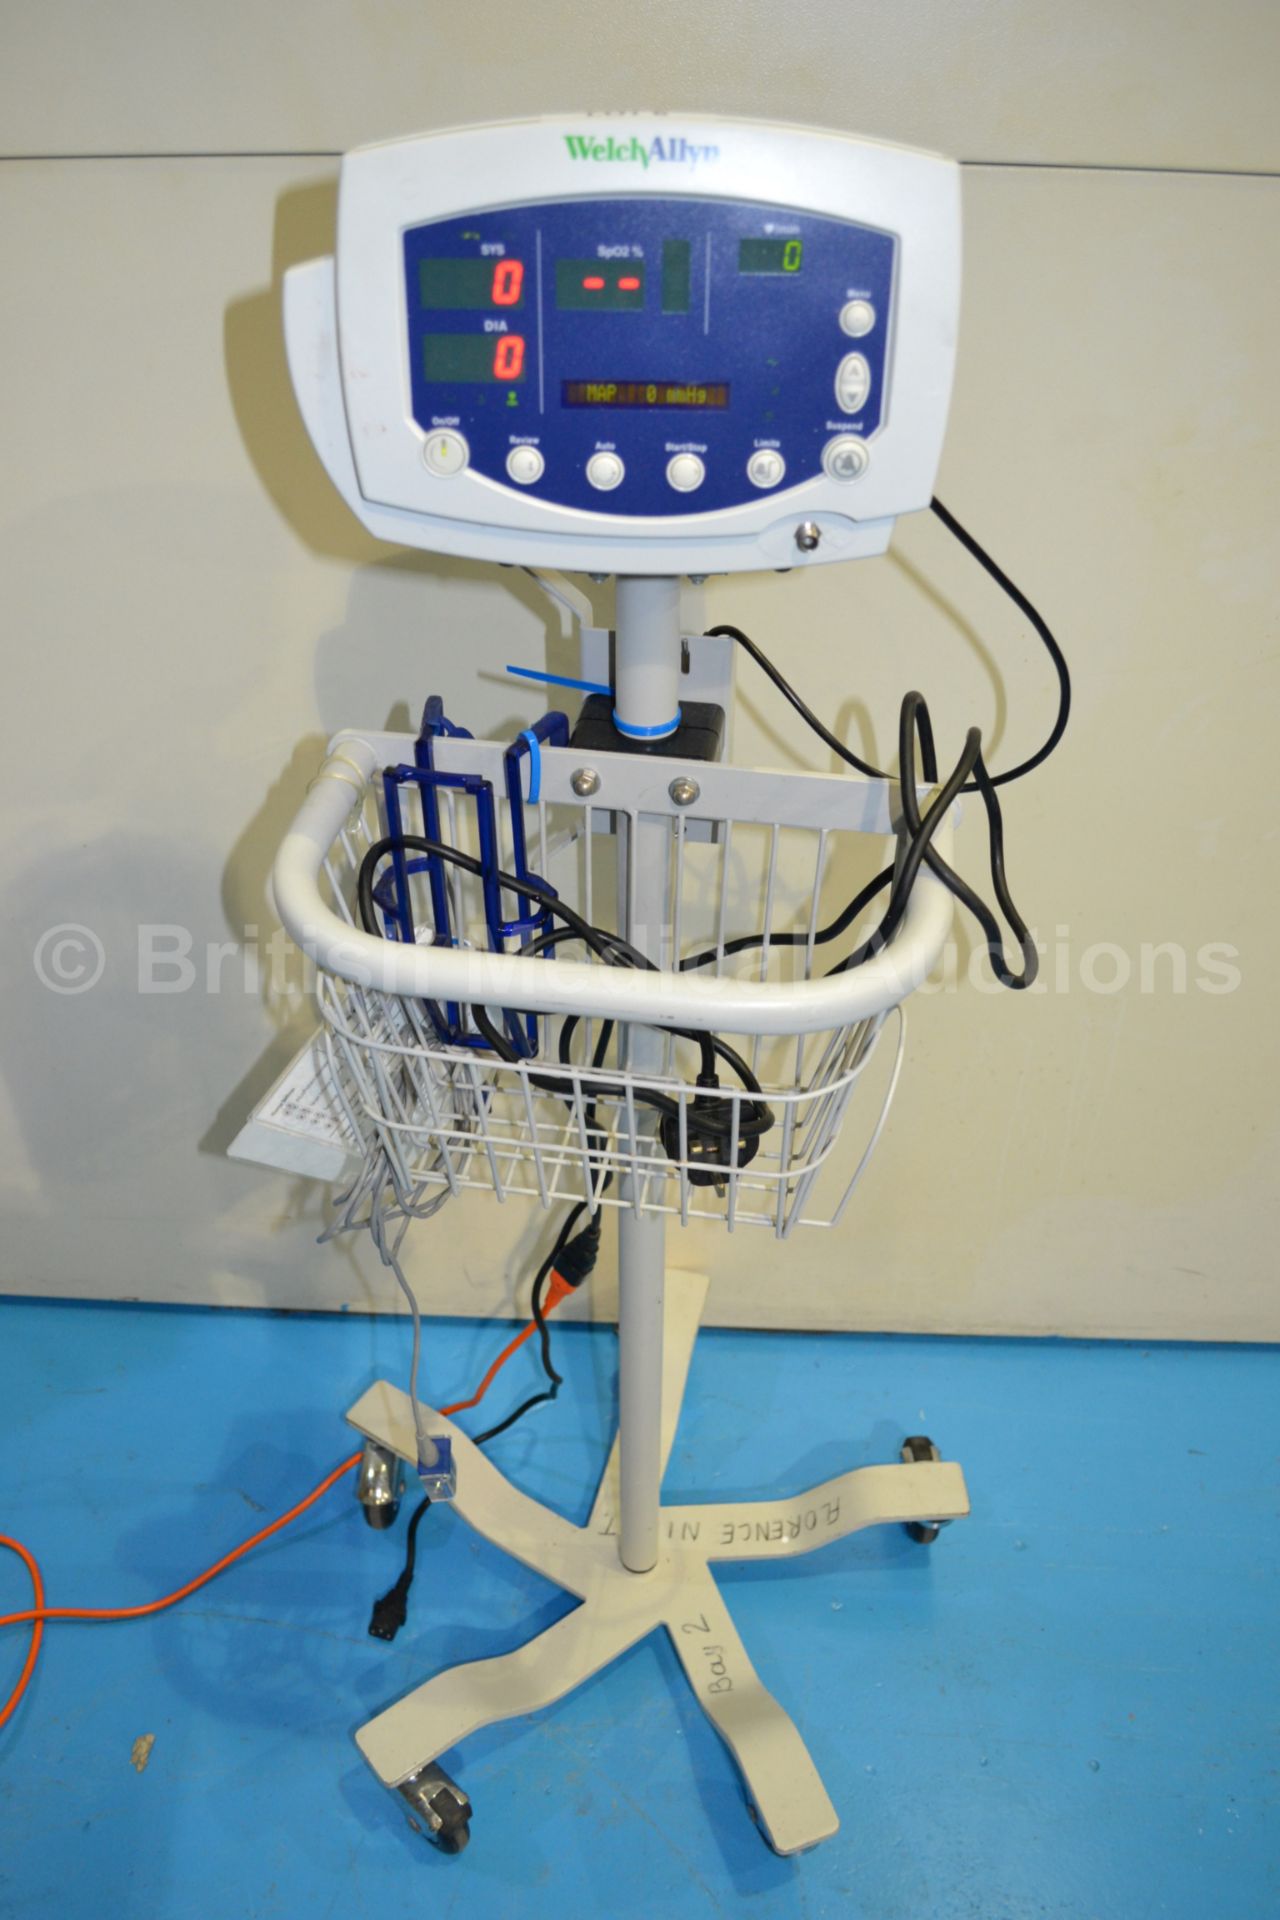 Welch Allyn 53N00 Vital Signs Monitor on Stand wit - Image 2 of 2